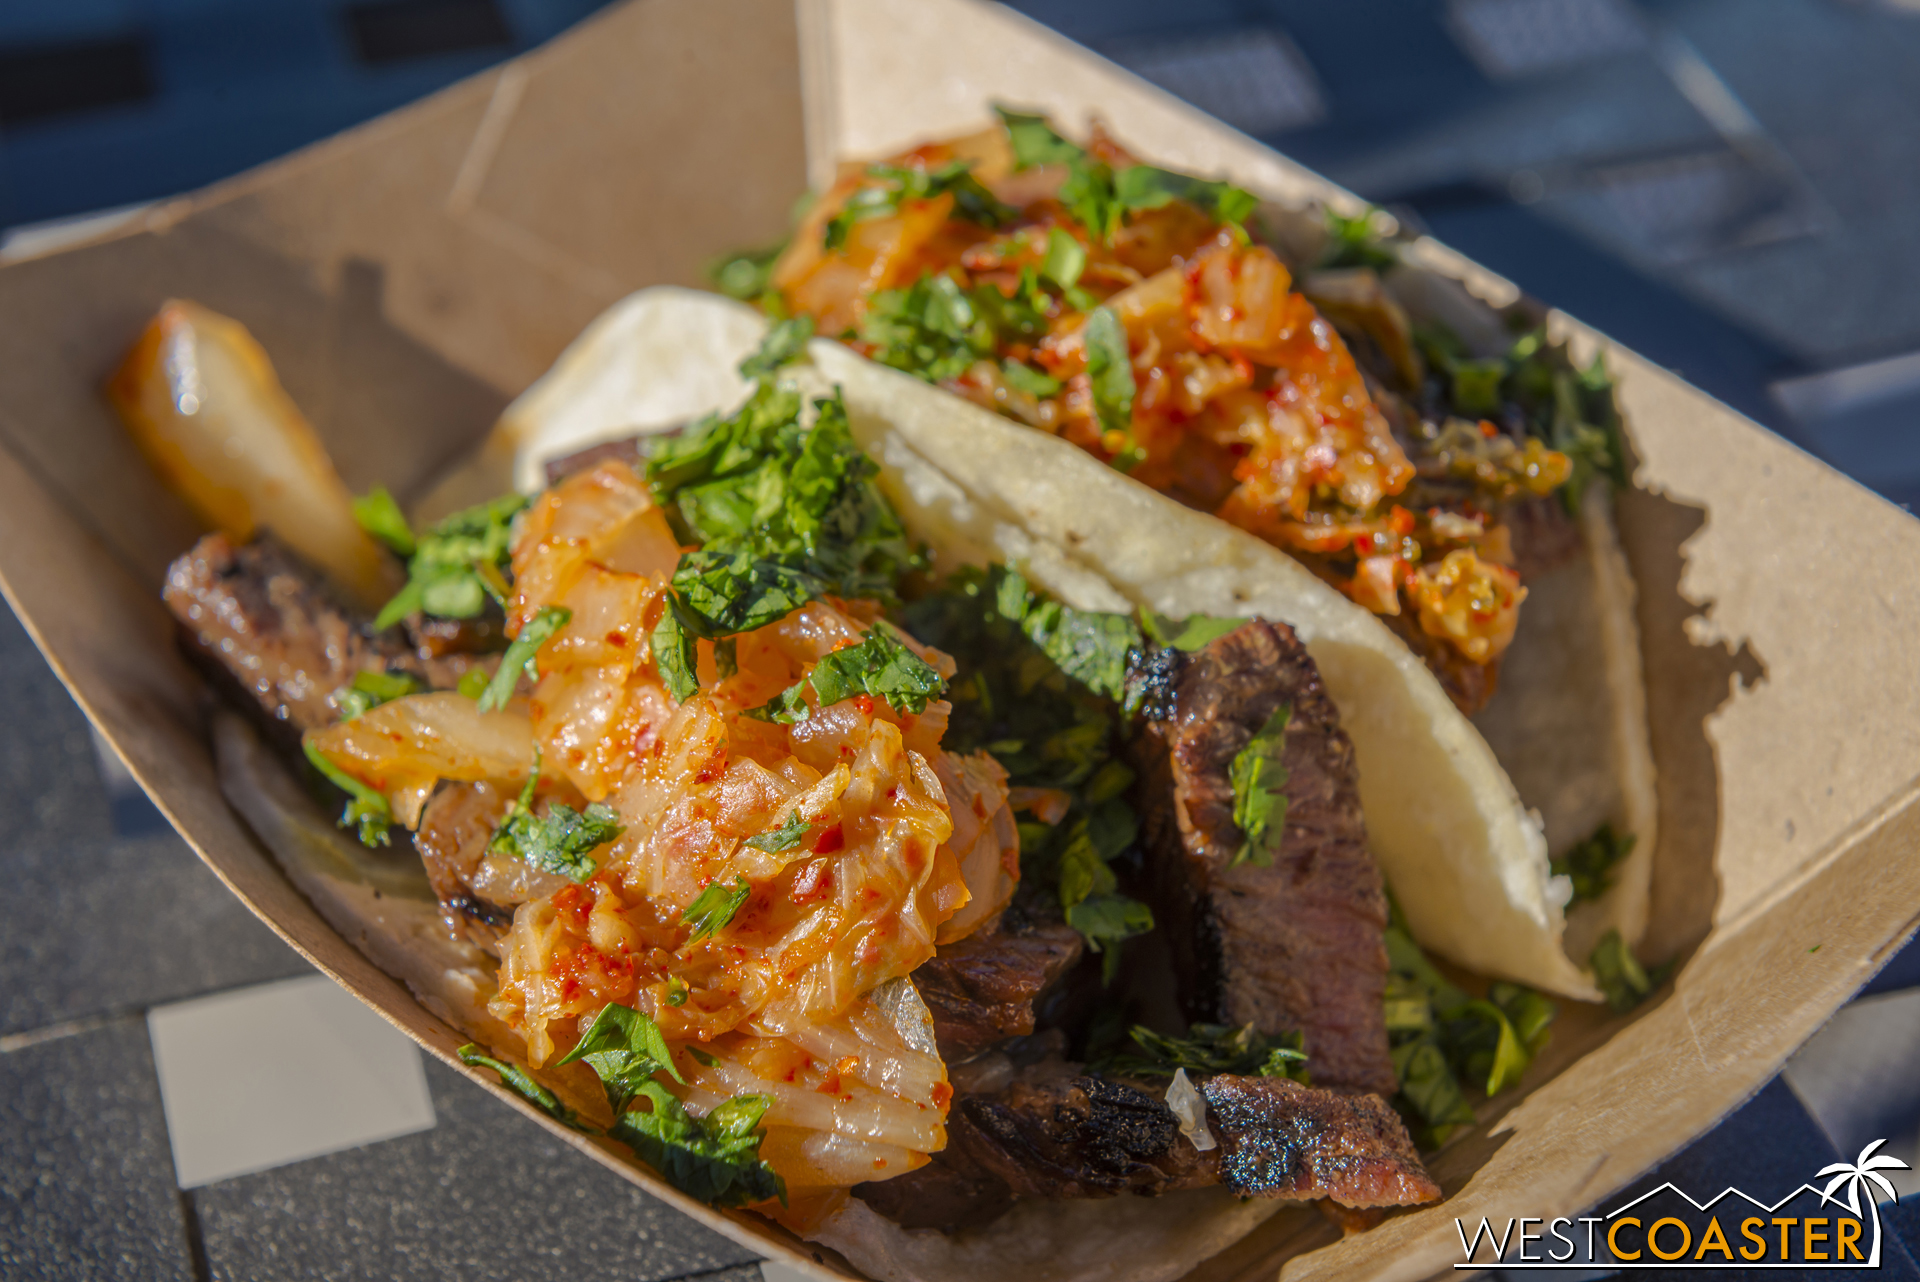  From LA Style:  Korean Barbecue Beef Short Rib Tacos  with Kimchi Slaw ($7.00) 